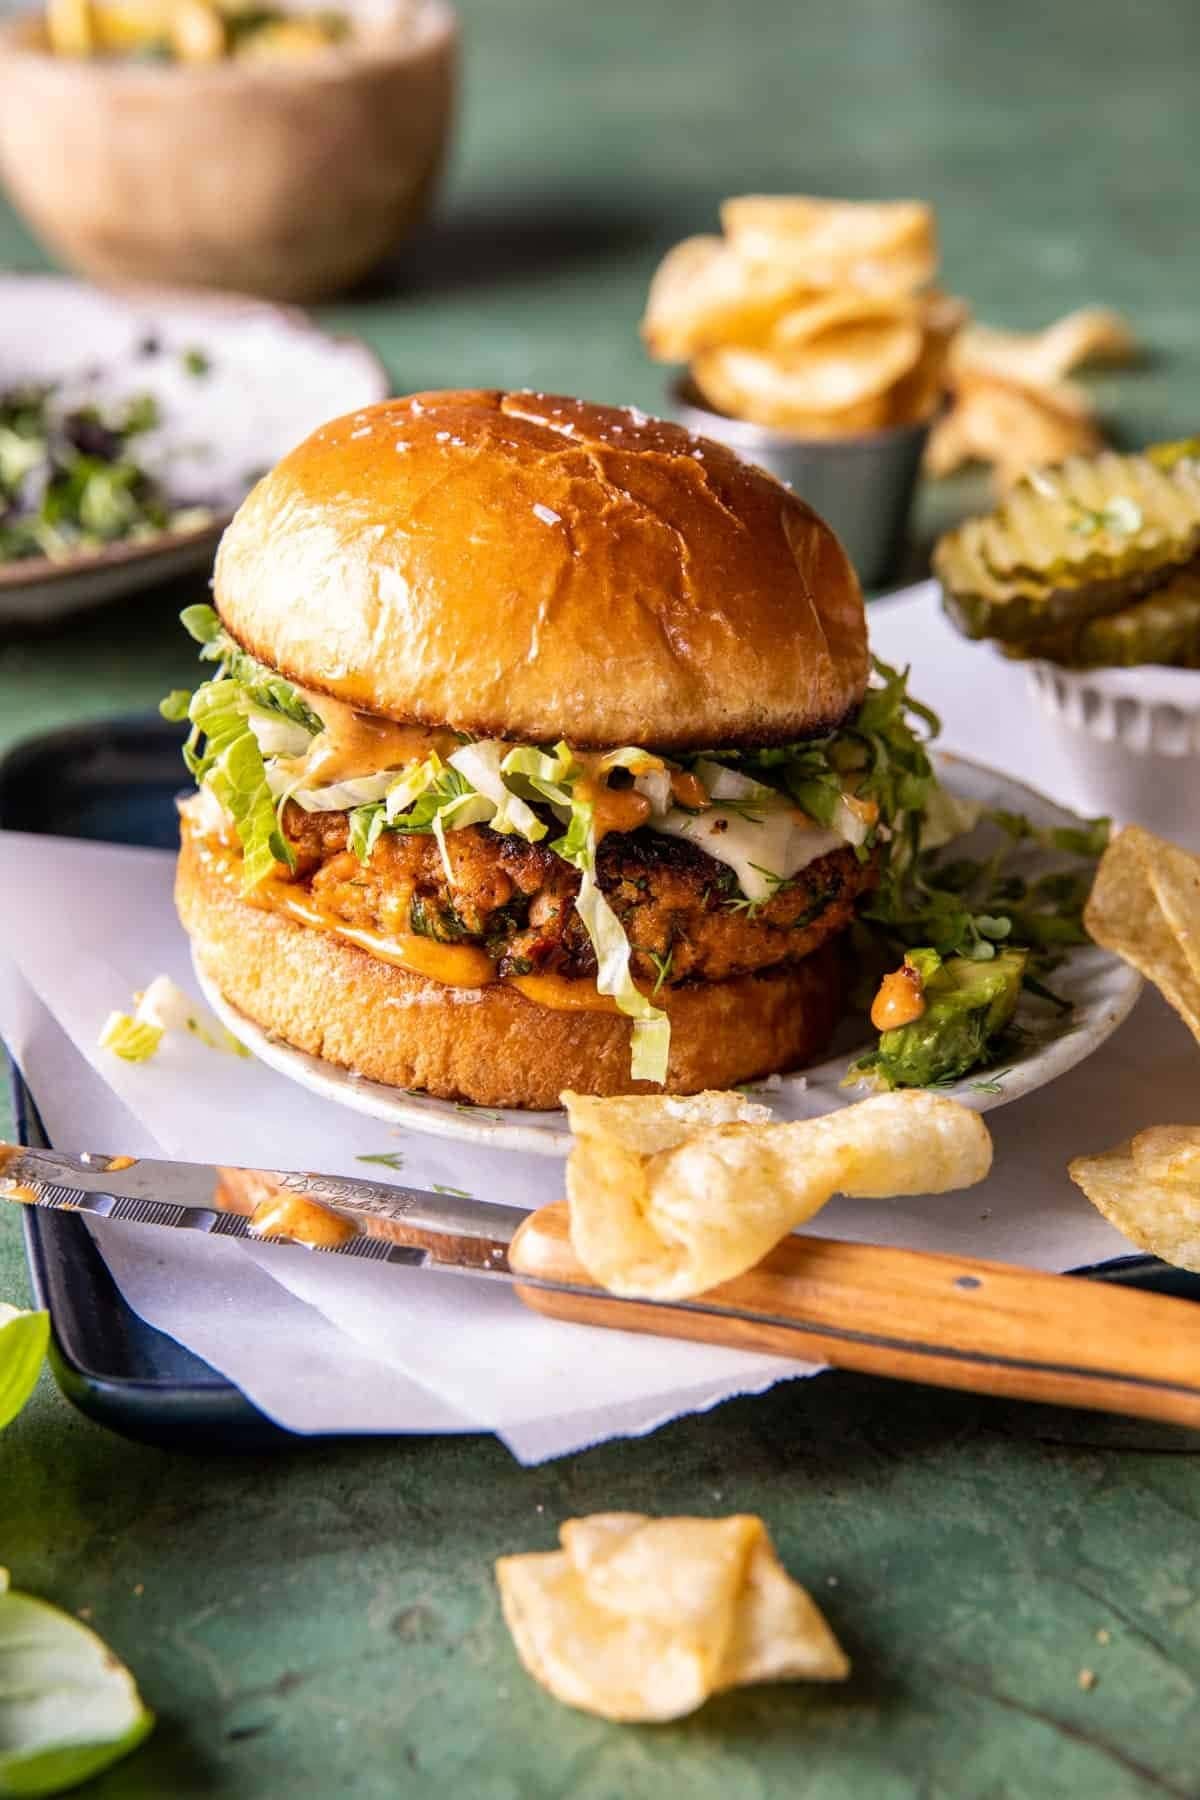 Pan-fried chipotle-seasoned salmon burgers sandwiched between toasted brioche buns with diced lettuce and creamy, spicy-sweet chipotle mayo